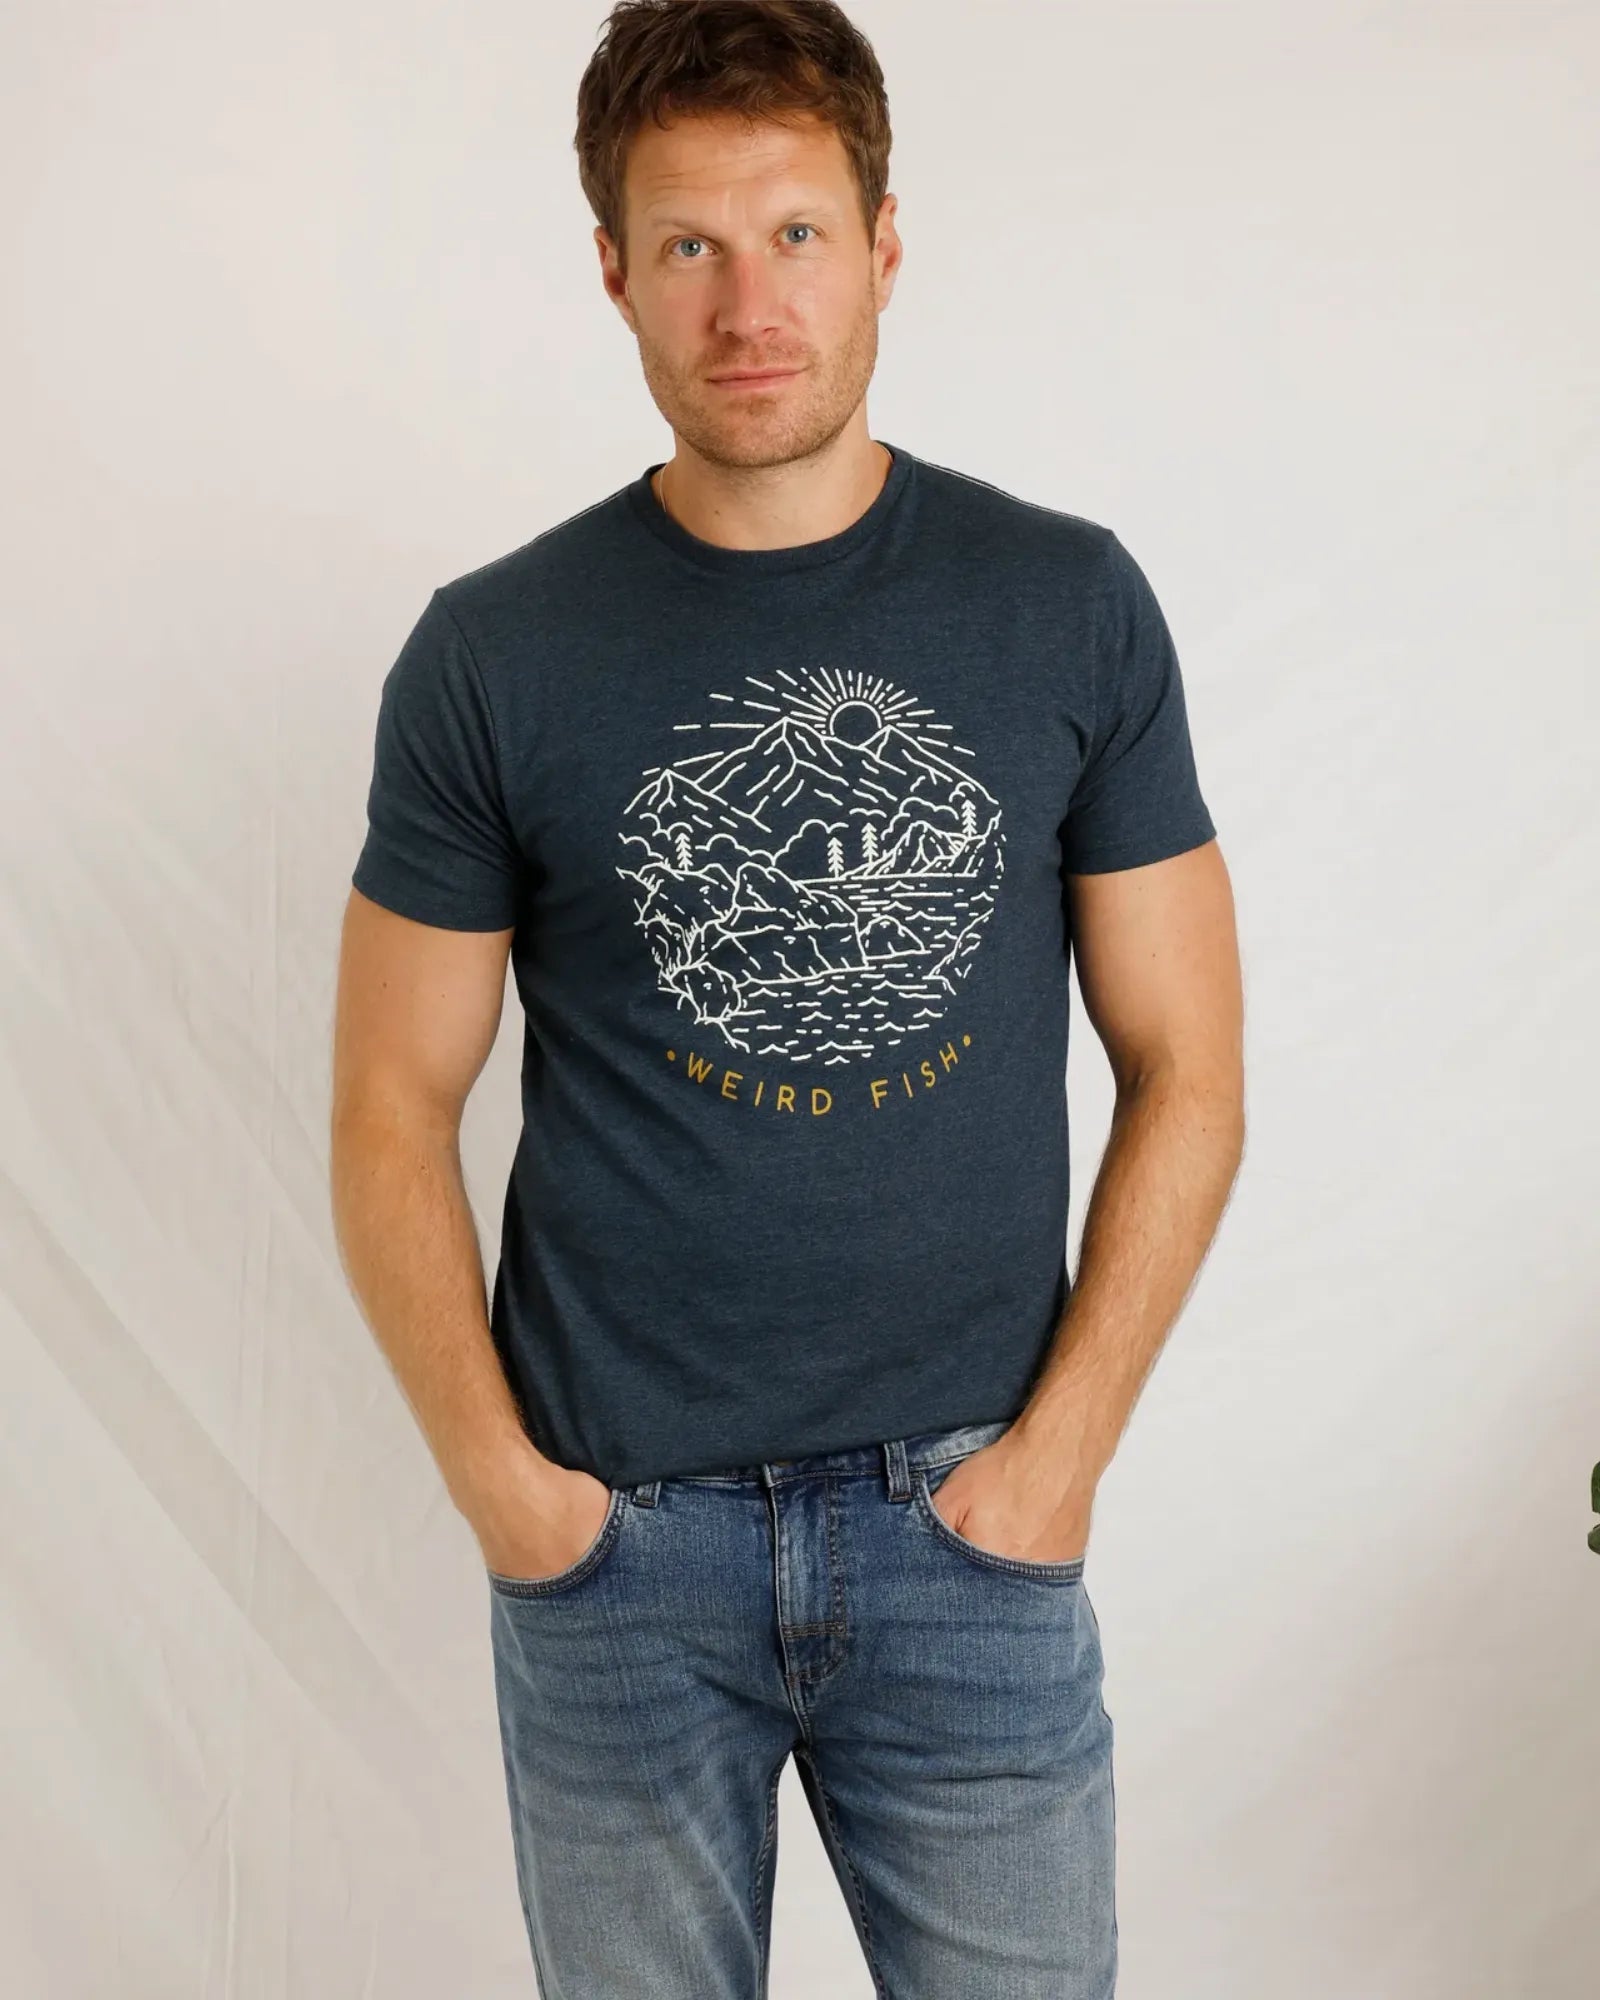 Lakes & Peaks Graphic T-Shirt - Navy